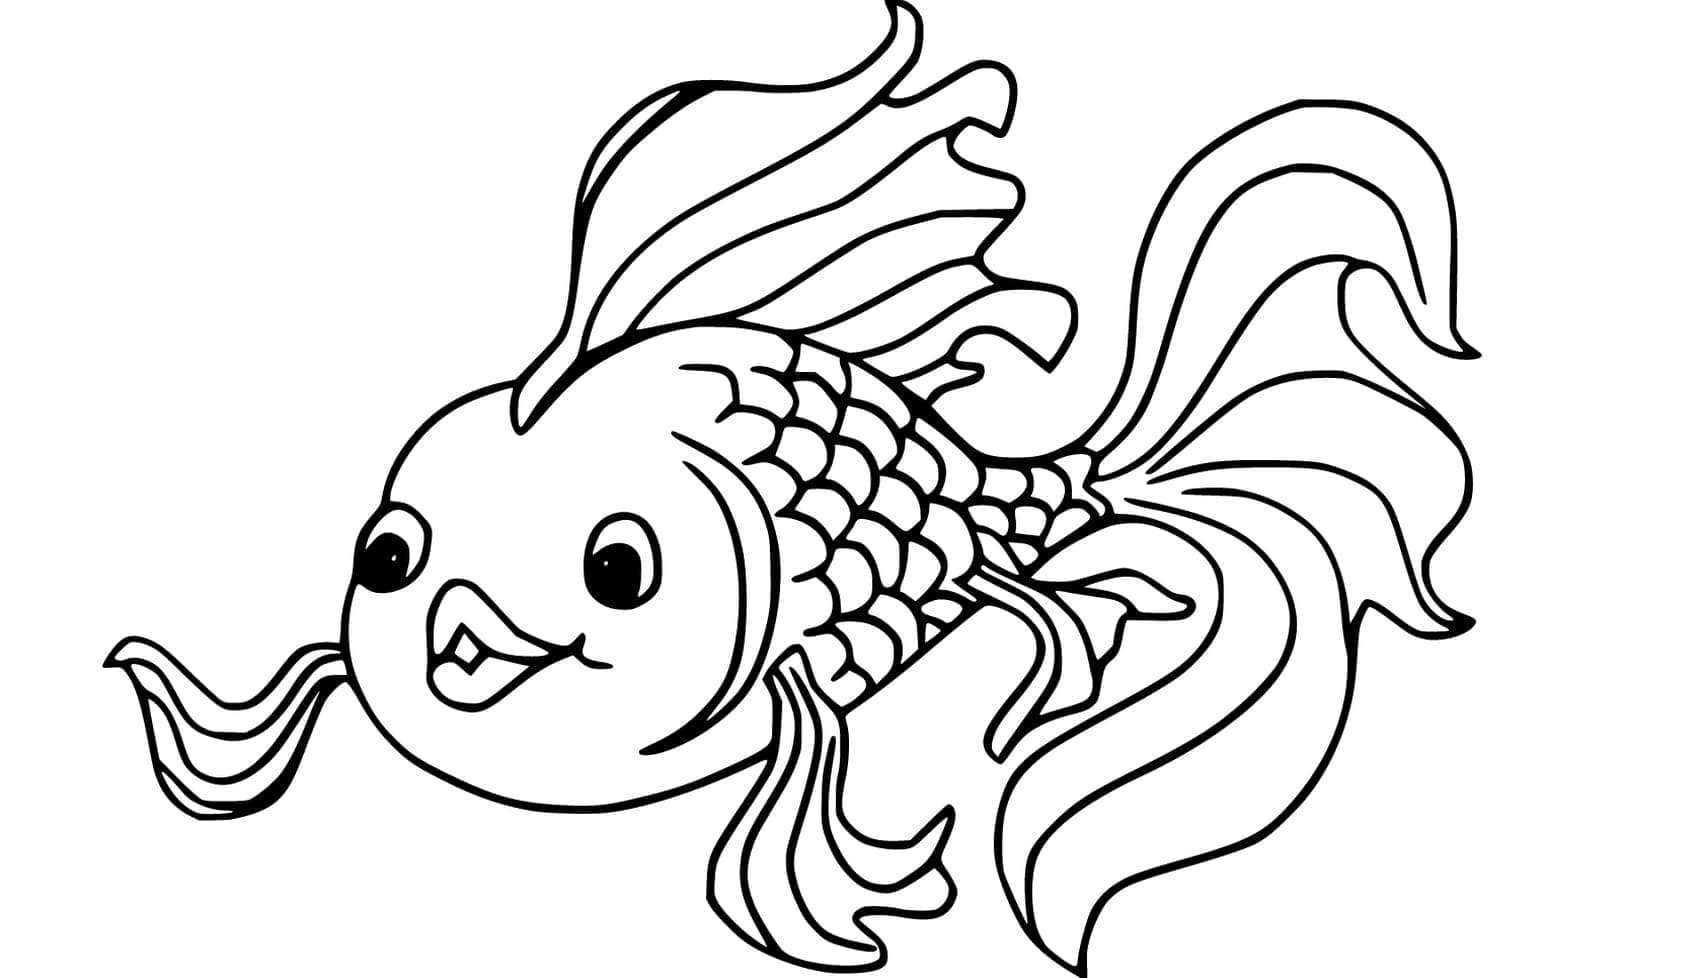 Poisson Rouge Amical coloring page